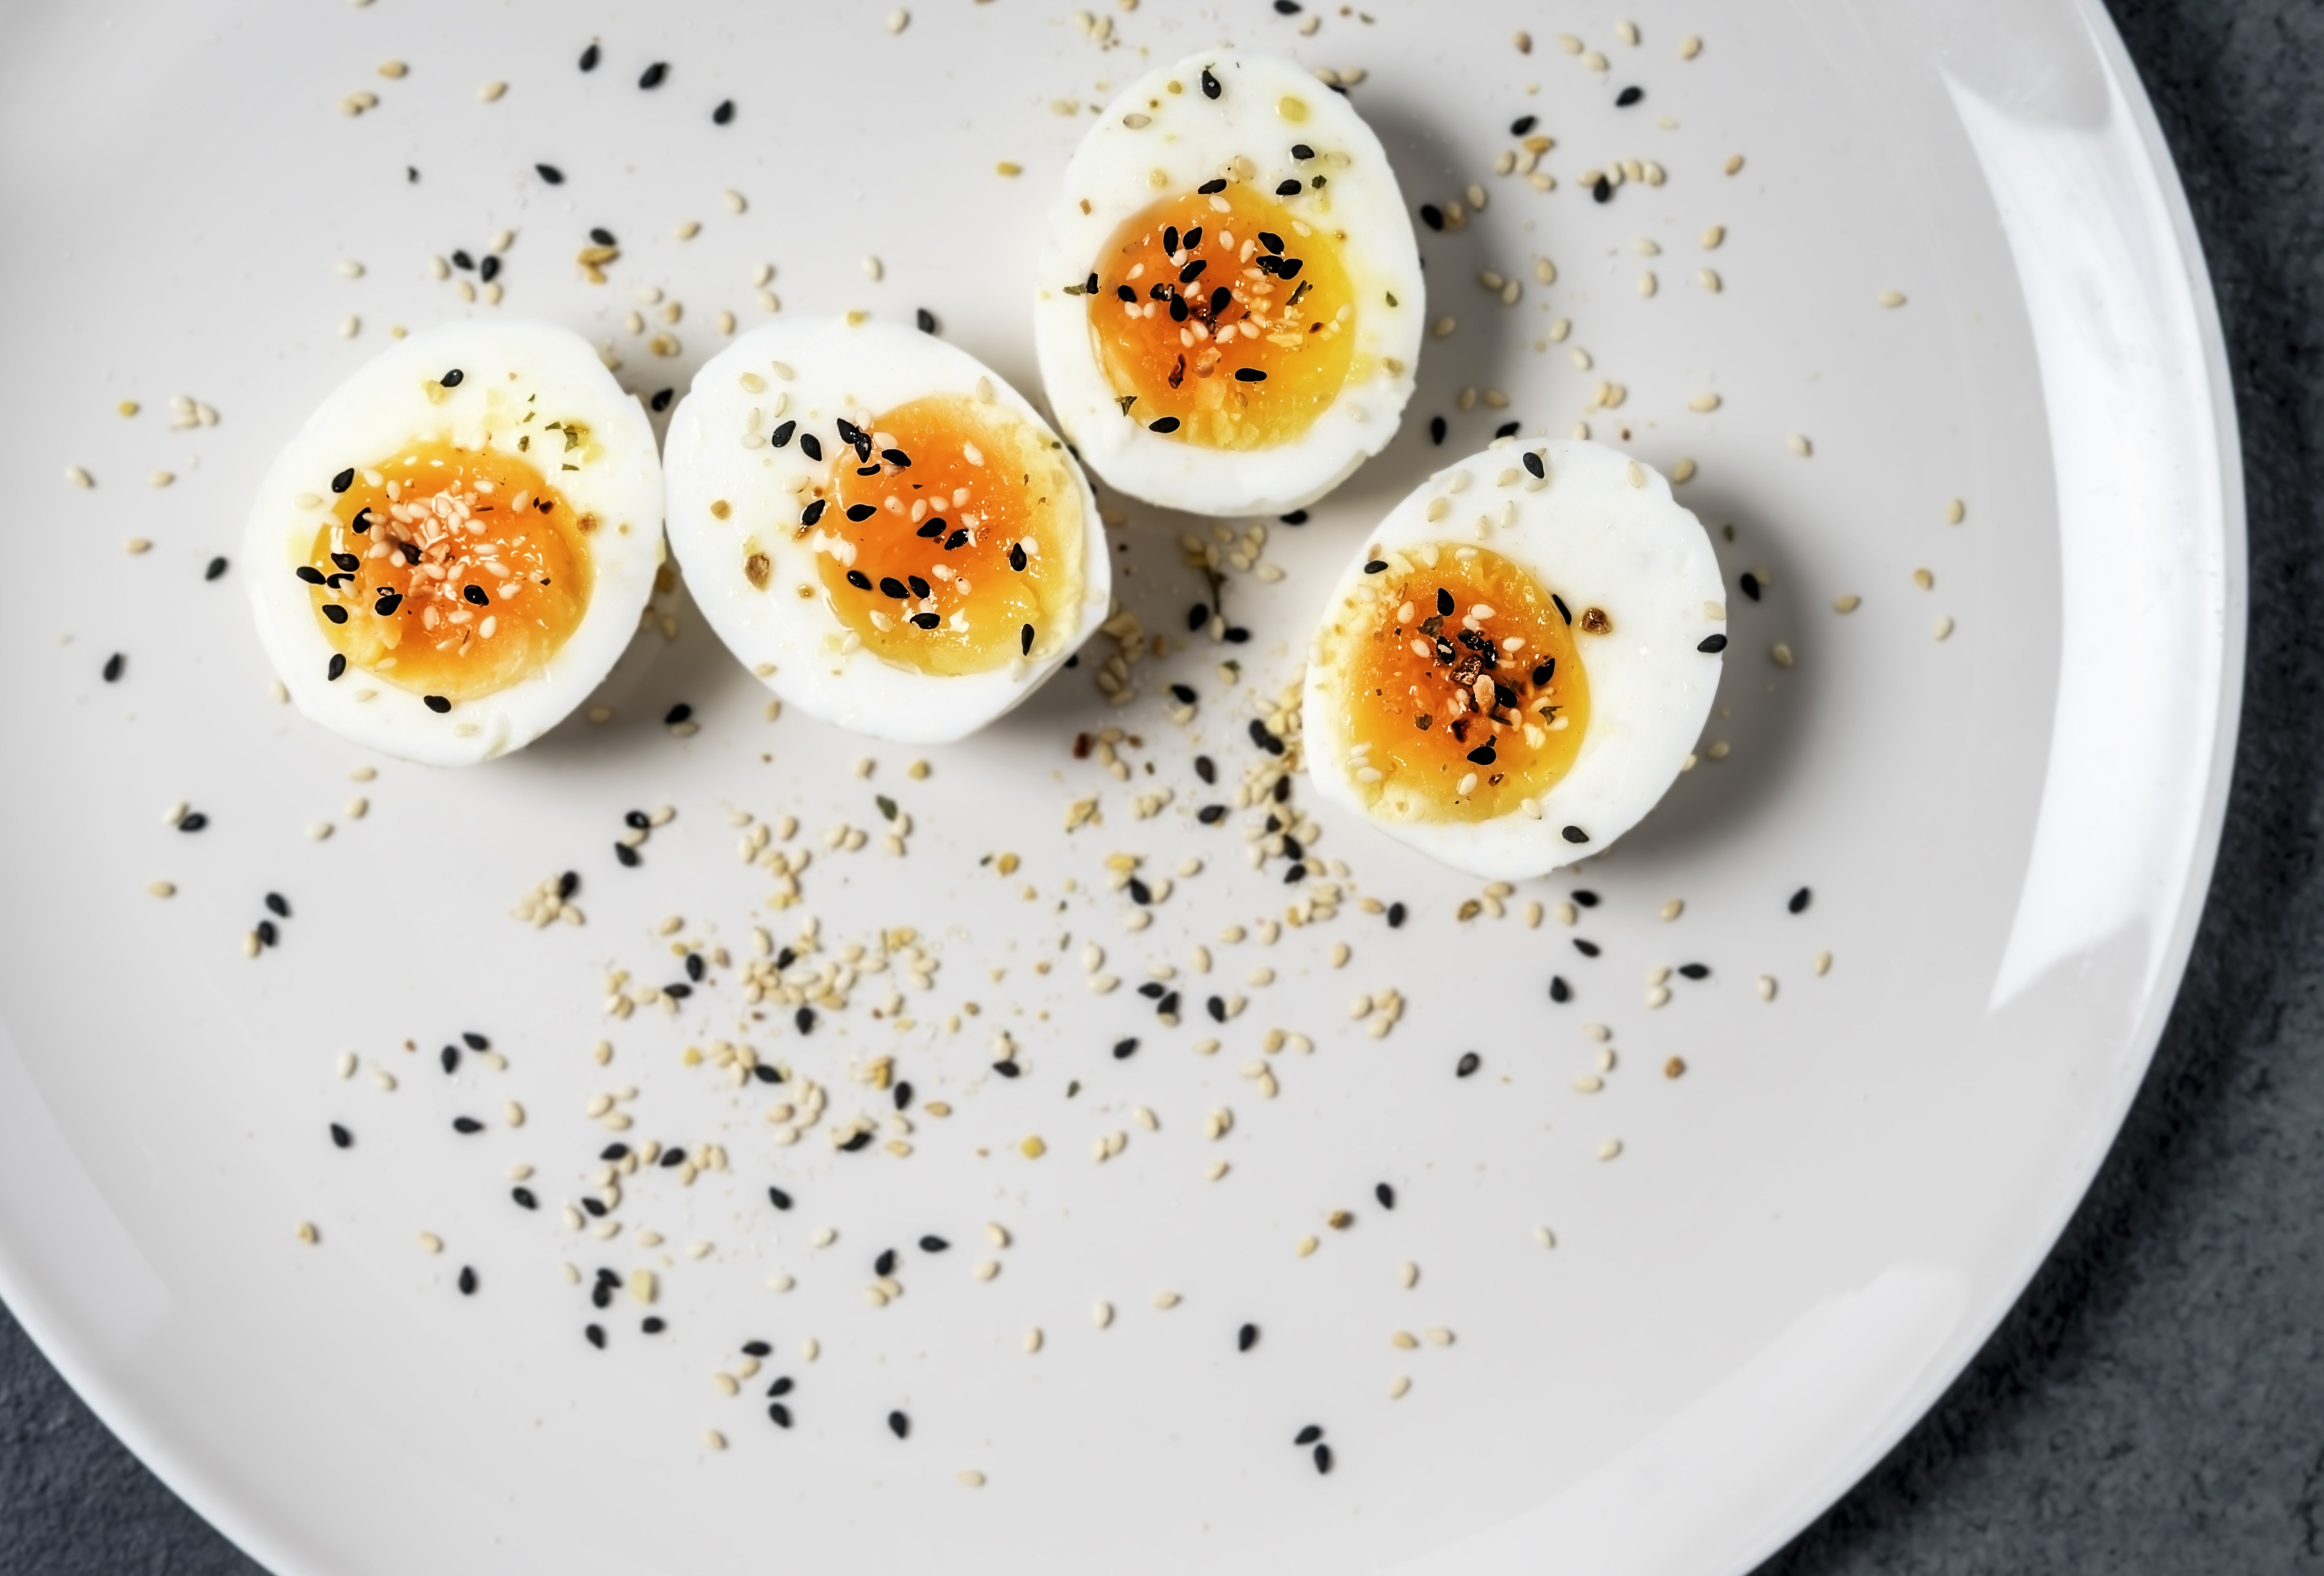 Can Boiled Eggs Help with Weight Loss?